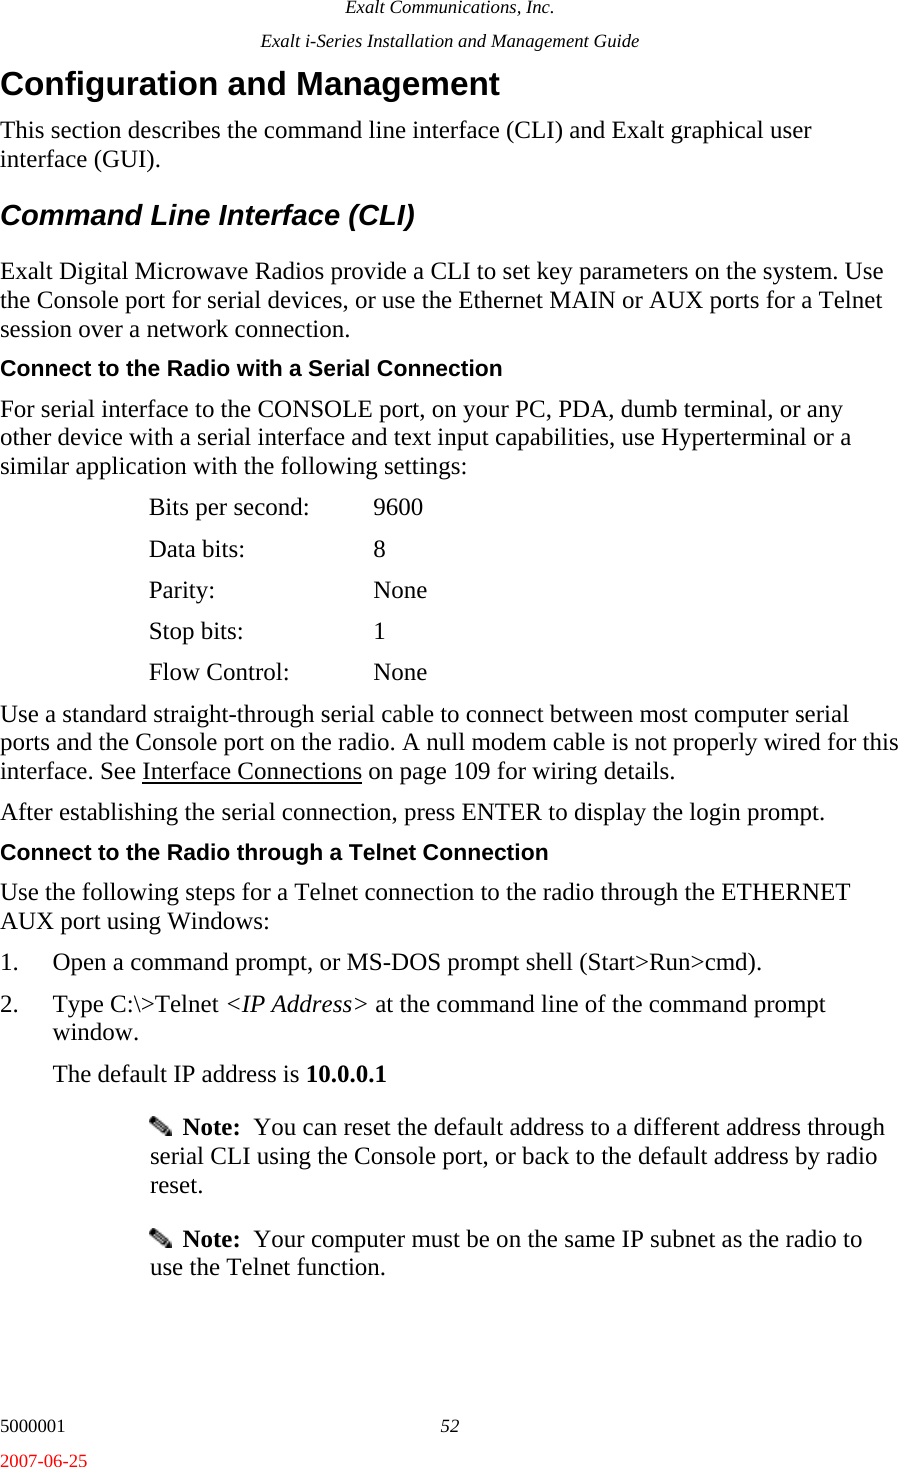 Exalt Communications, Inc. Exalt i-Series Installation and Management Guide 5000001  52 2007-06-25 Configuration and Management This section describes the command line interface (CLI) and Exalt graphical user interface (GUI). Command Line Interface (CLI) Exalt Digital Microwave Radios provide a CLI to set key parameters on the system. Use the Console port for serial devices, or use the Ethernet MAIN or AUX ports for a Telnet session over a network connection. Connect to the Radio with a Serial Connection For serial interface to the CONSOLE port, on your PC, PDA, dumb terminal, or any other device with a serial interface and text input capabilities, use Hyperterminal or a similar application with the following settings:   Bits per second:  9600  Data bits: 8  Parity:  None  Stop bits: 1  Flow Control: None Use a standard straight-through serial cable to connect between most computer serial ports and the Console port on the radio. A null modem cable is not properly wired for this interface. See Interface Connections on page 109 for wiring details. After establishing the serial connection, press ENTER to display the login prompt. Connect to the Radio through a Telnet Connection Use the following steps for a Telnet connection to the radio through the ETHERNET AUX port using Windows: 1. Open a command prompt, or MS-DOS prompt shell (Start&gt;Run&gt;cmd). 2. Type C:\&gt;Telnet &lt;IP Address&gt; at the command line of the command prompt window. The default IP address is 10.0.0.1   Note:  You can reset the default address to a different address through serial CLI using the Console port, or back to the default address by radio reset.   Note:  Your computer must be on the same IP subnet as the radio to use the Telnet function. 